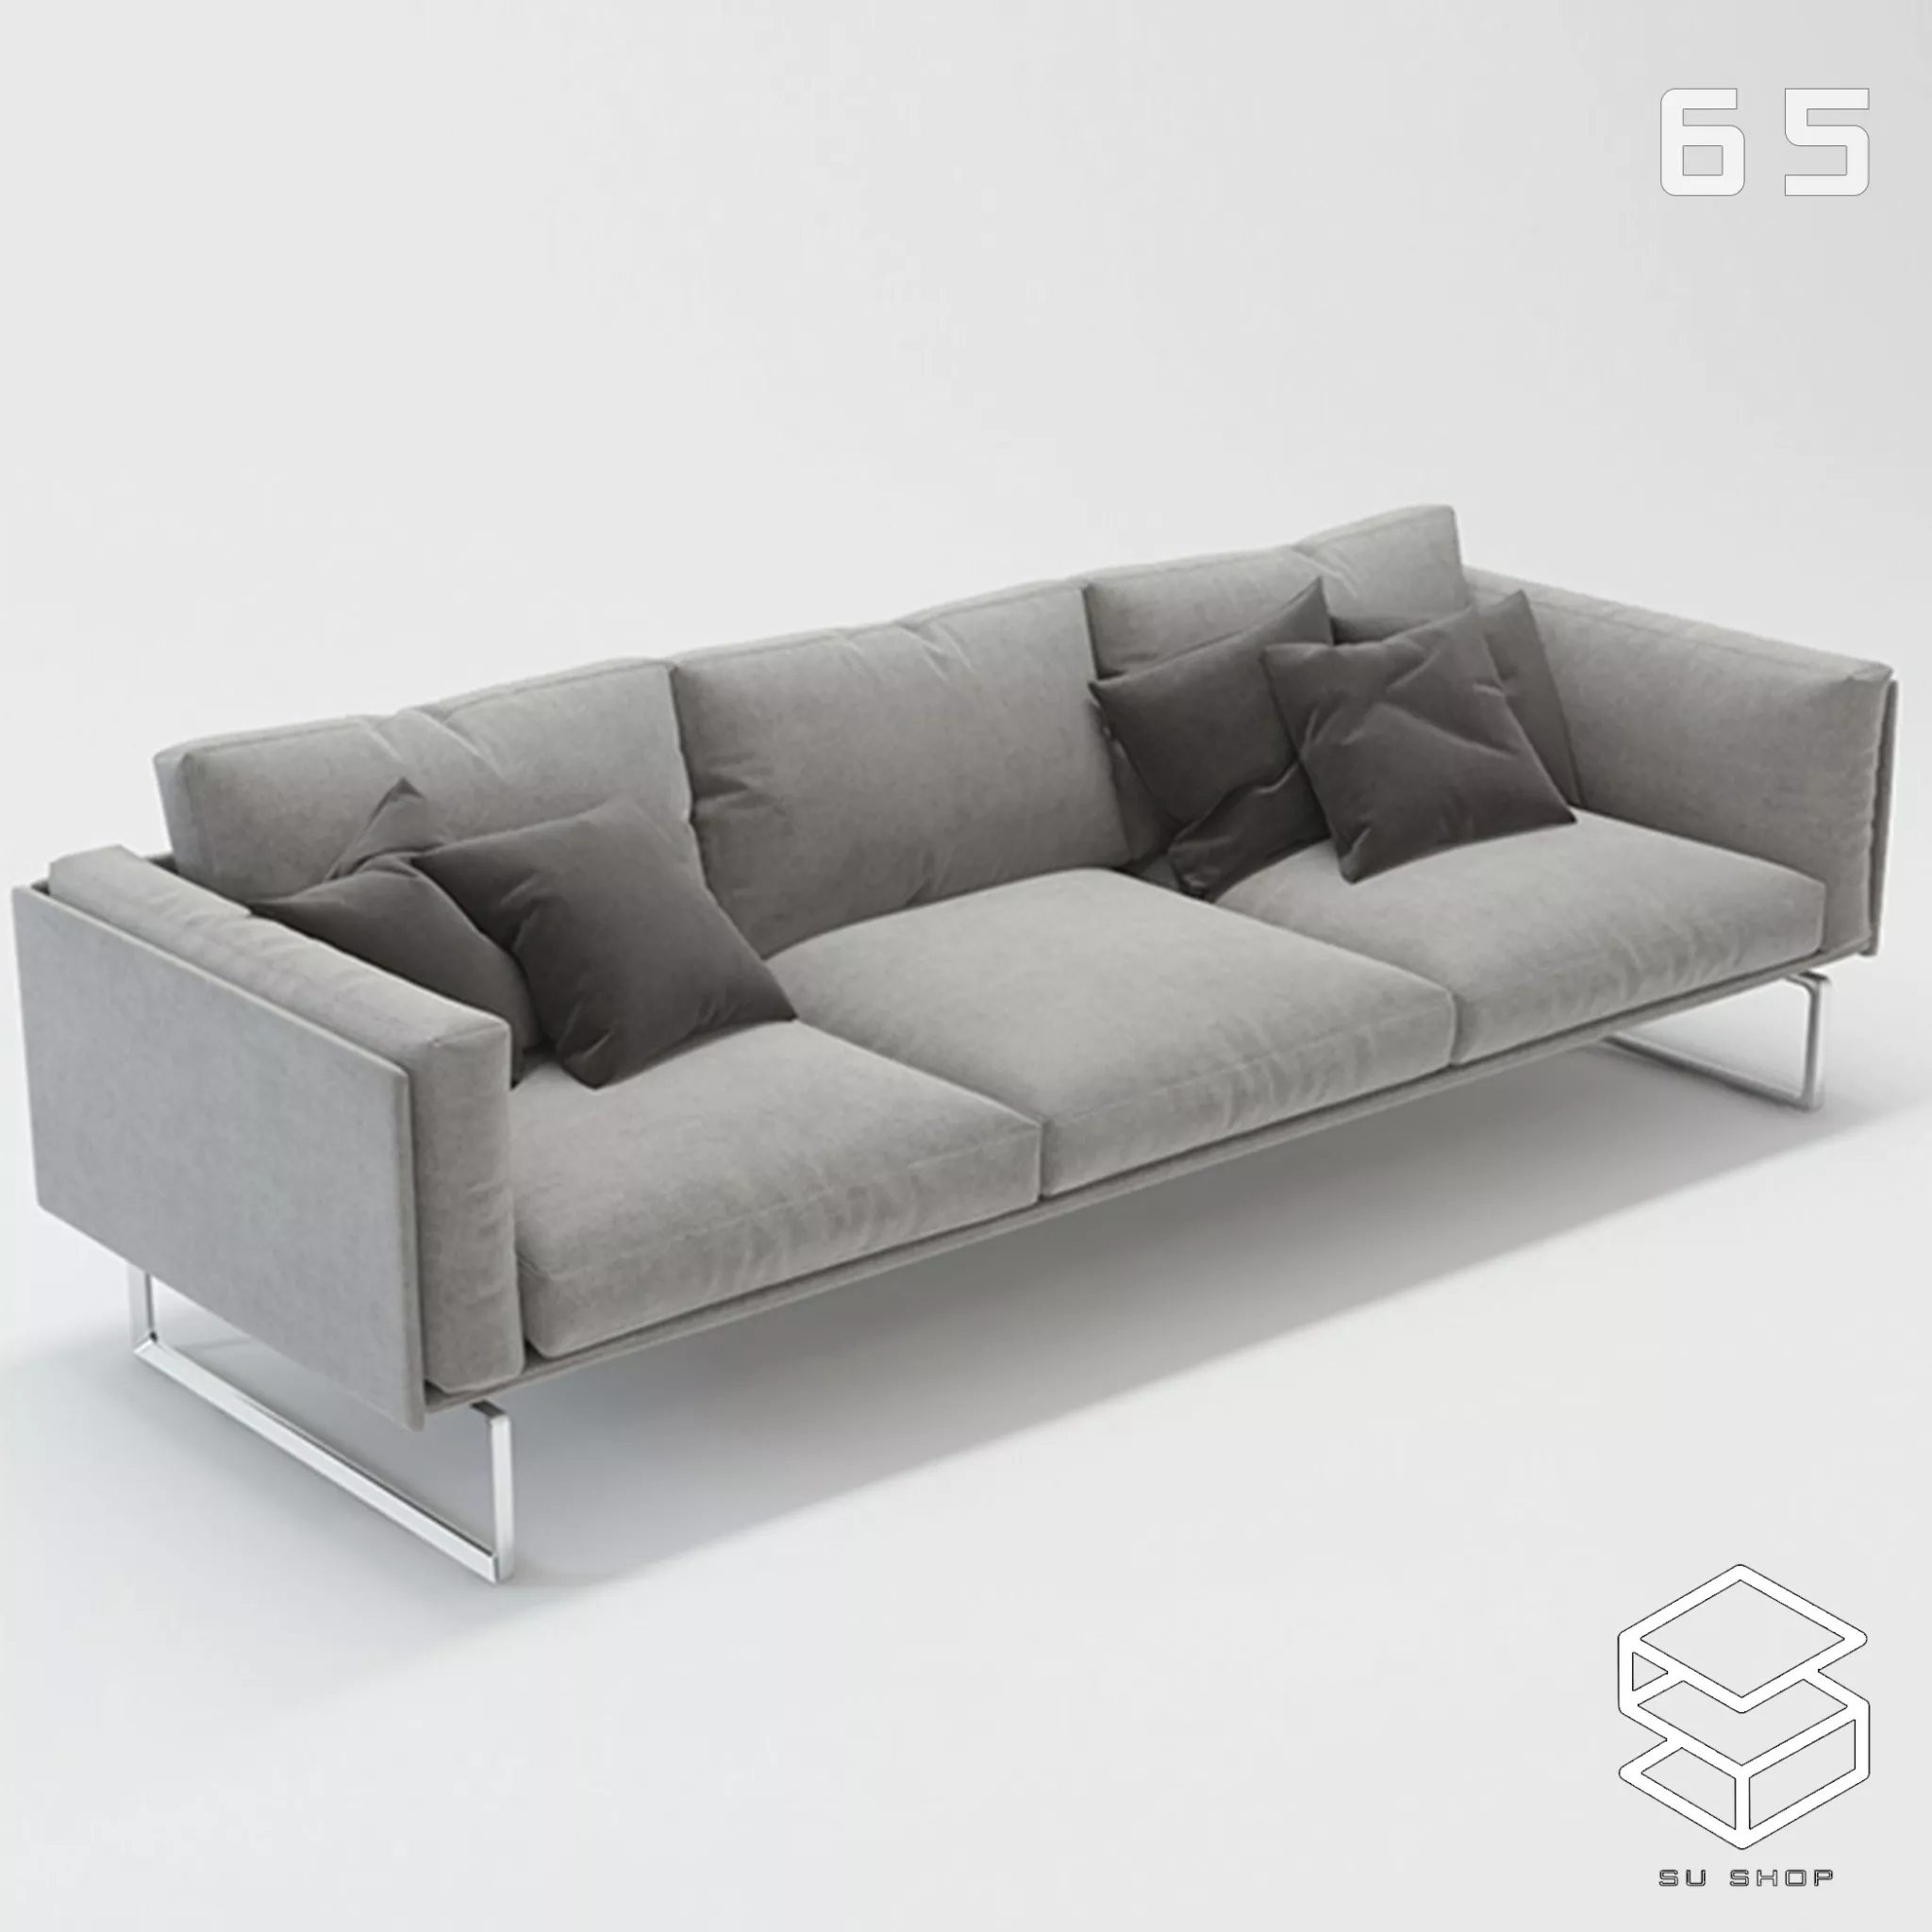 MODERN SOFA - SKETCHUP 3D MODEL - VRAY OR ENSCAPE - ID13691